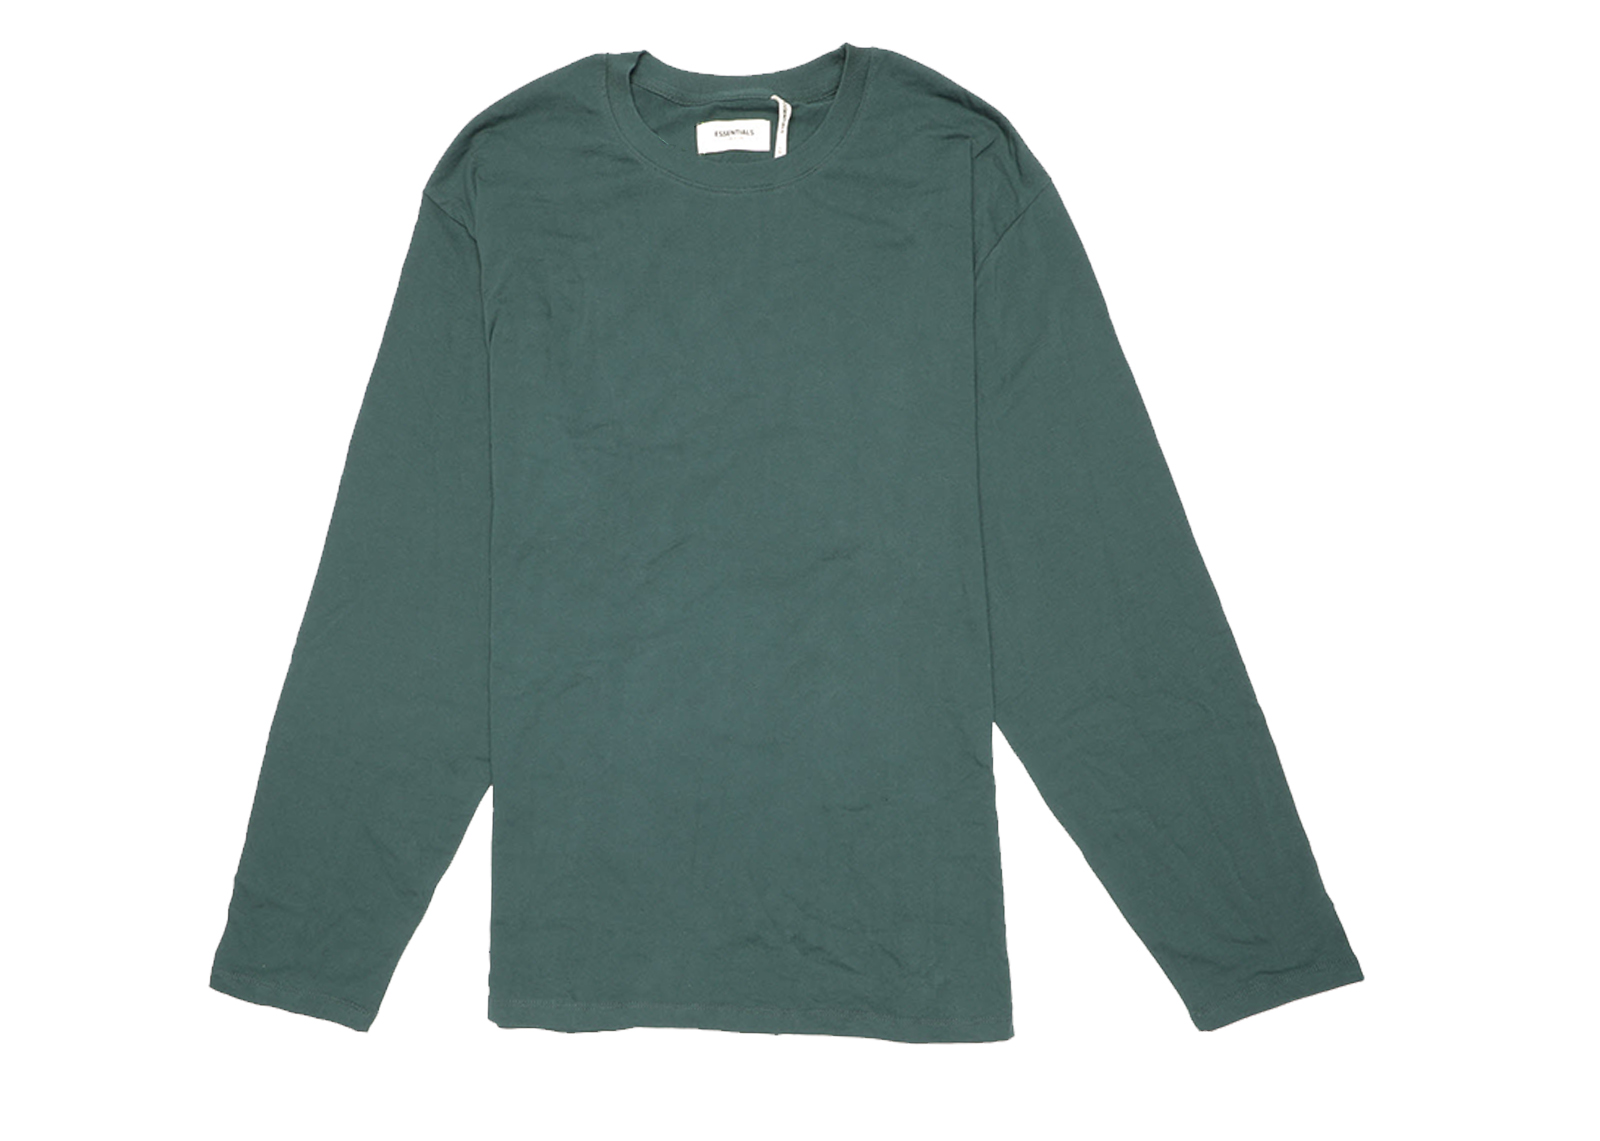 FEAR OF GOD Essentials Boxy Graphic Long Sleeve T-Shirt Green - FW18